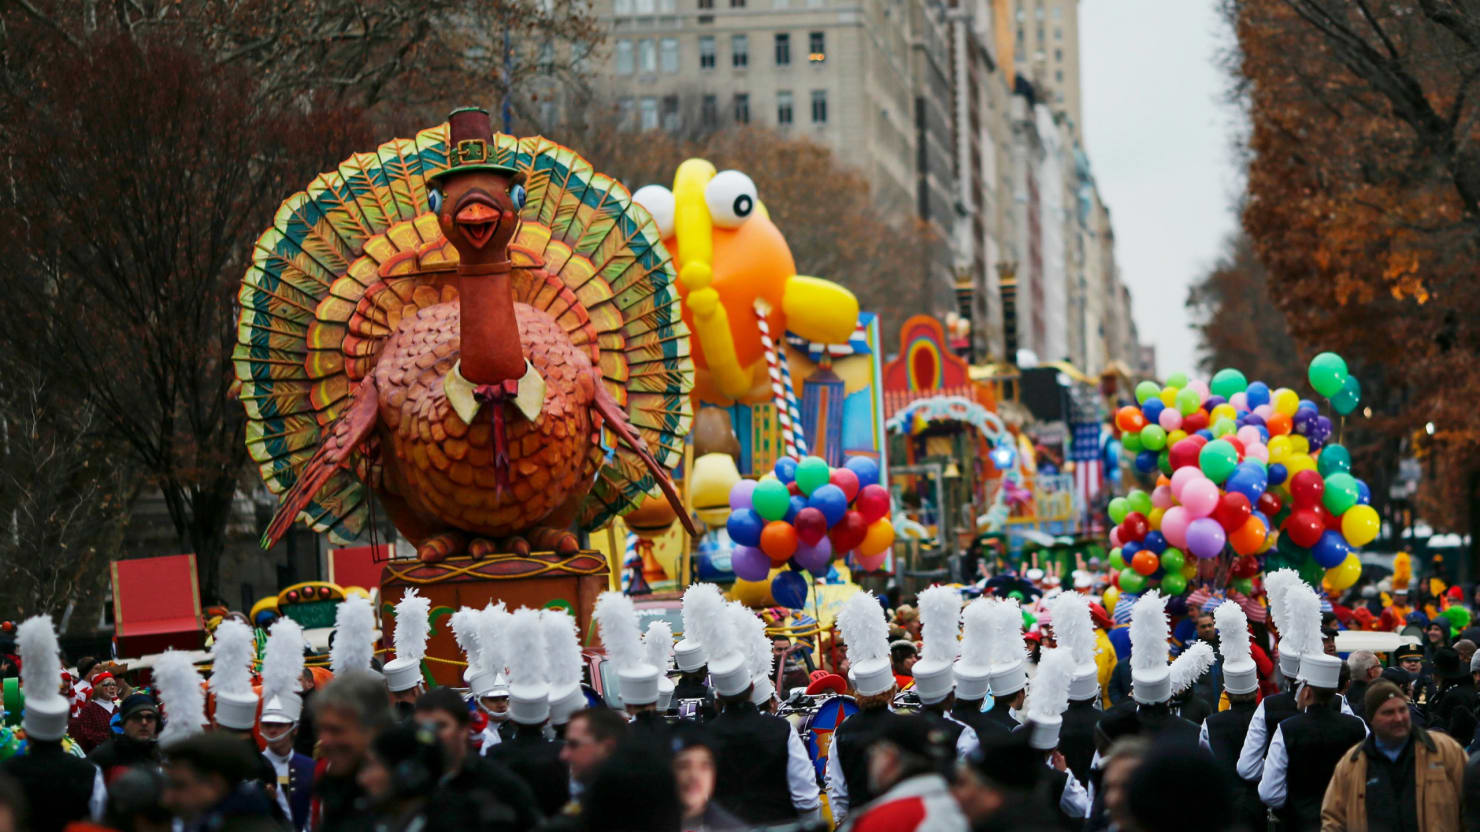 How to Watch 2015 Macy’s Thanksgiving Day Parade Live Stream Online - Streaming Thanksgiving Day Parade Online